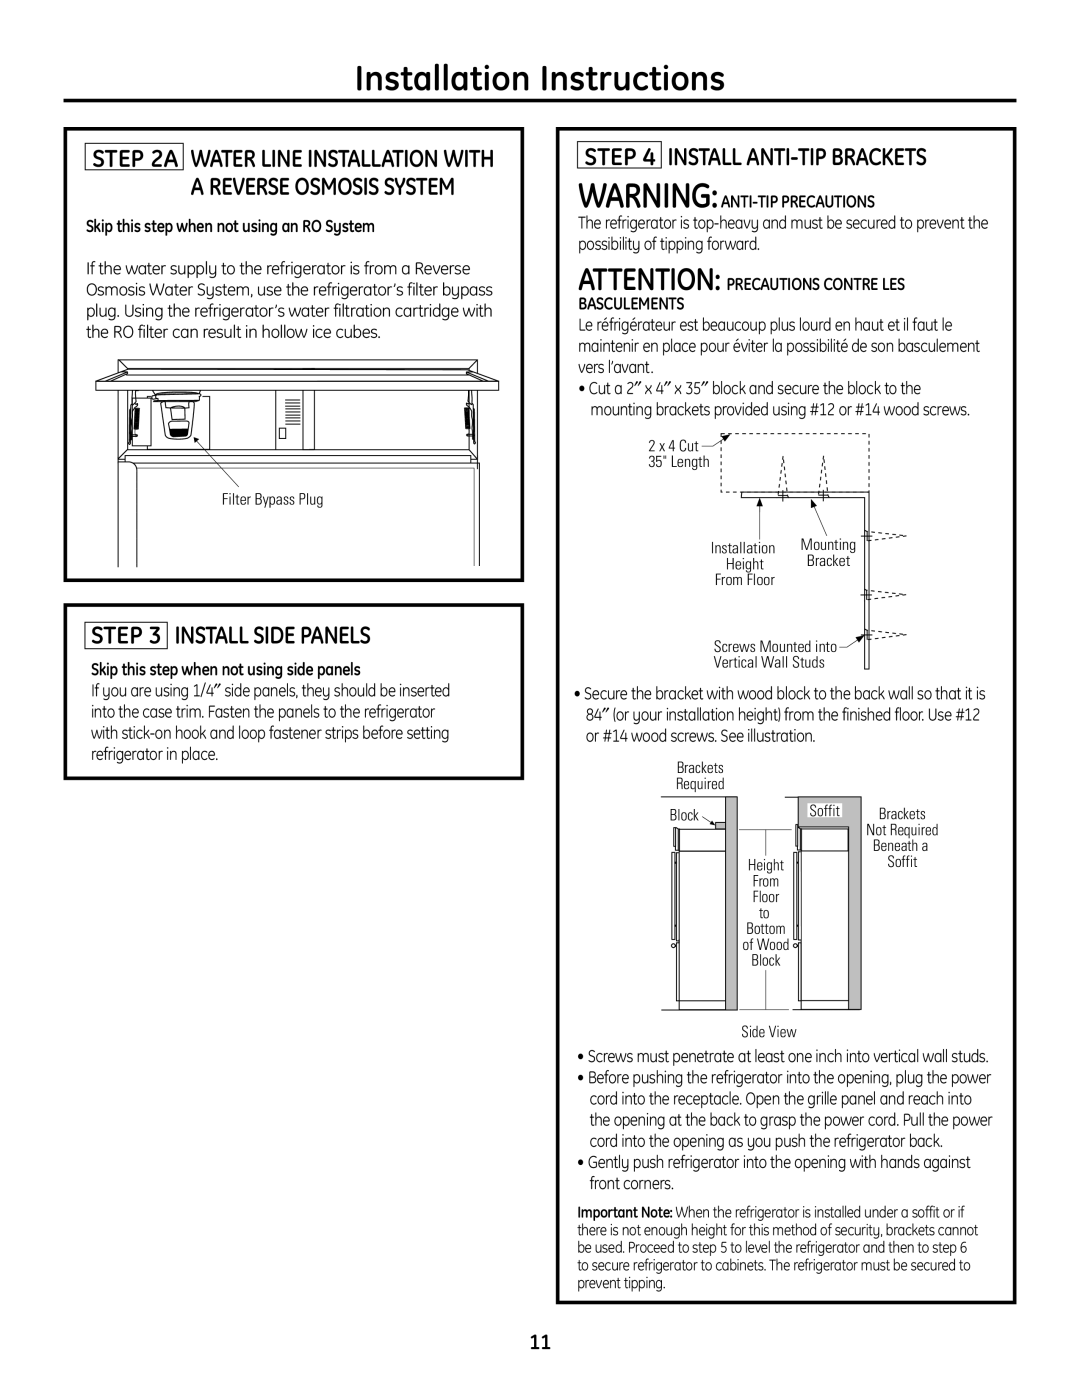 GE 49-60468-1 Install Side Panels, Install Anti-Tipbrackets, Skip this step when not using an RO System 